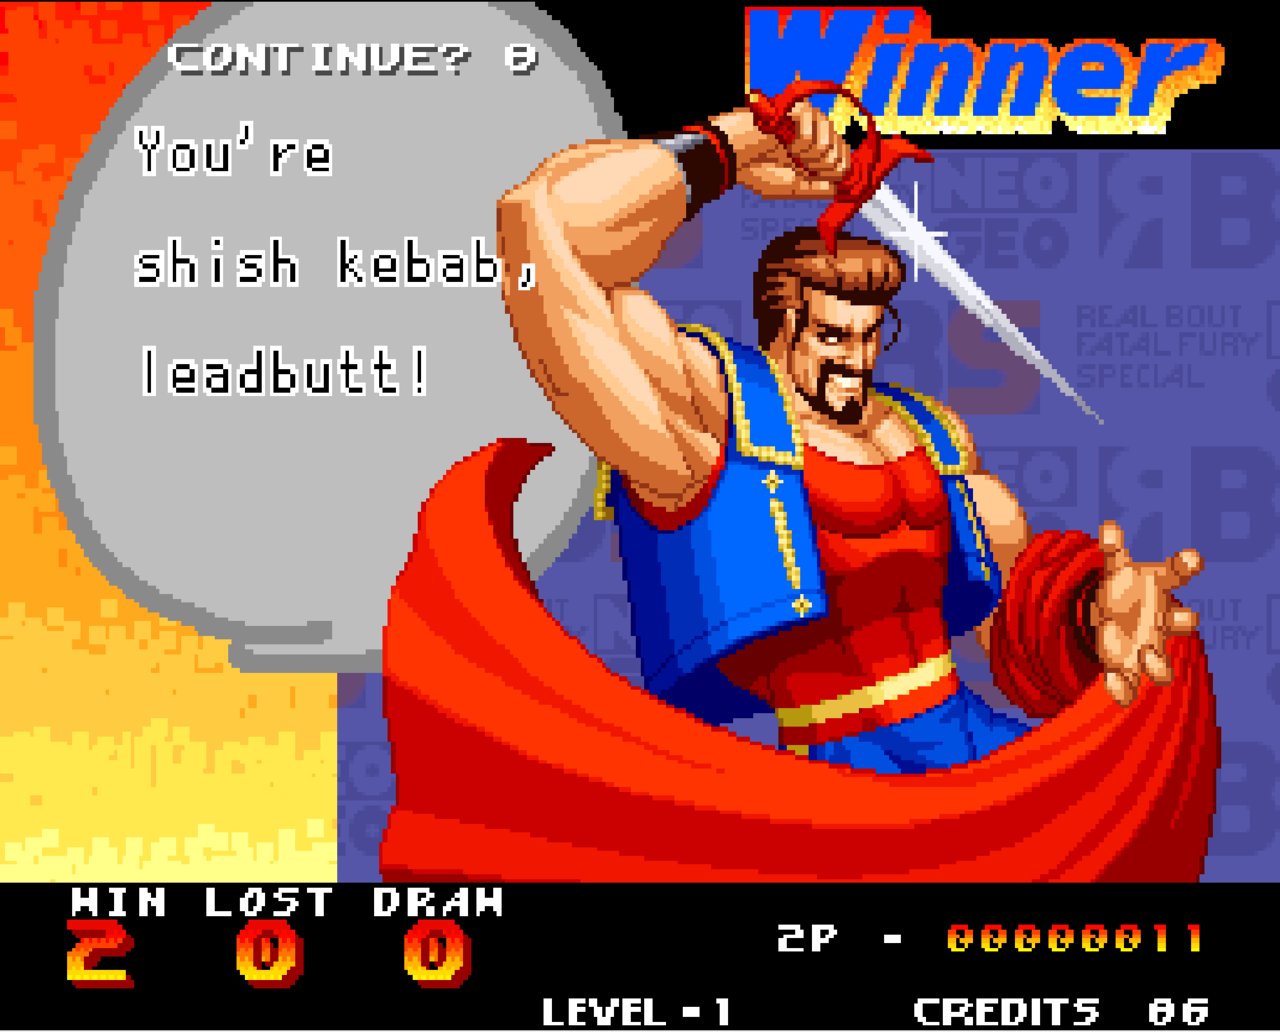 Real Bout Fatal Fury/Krauser — StrategyWiki